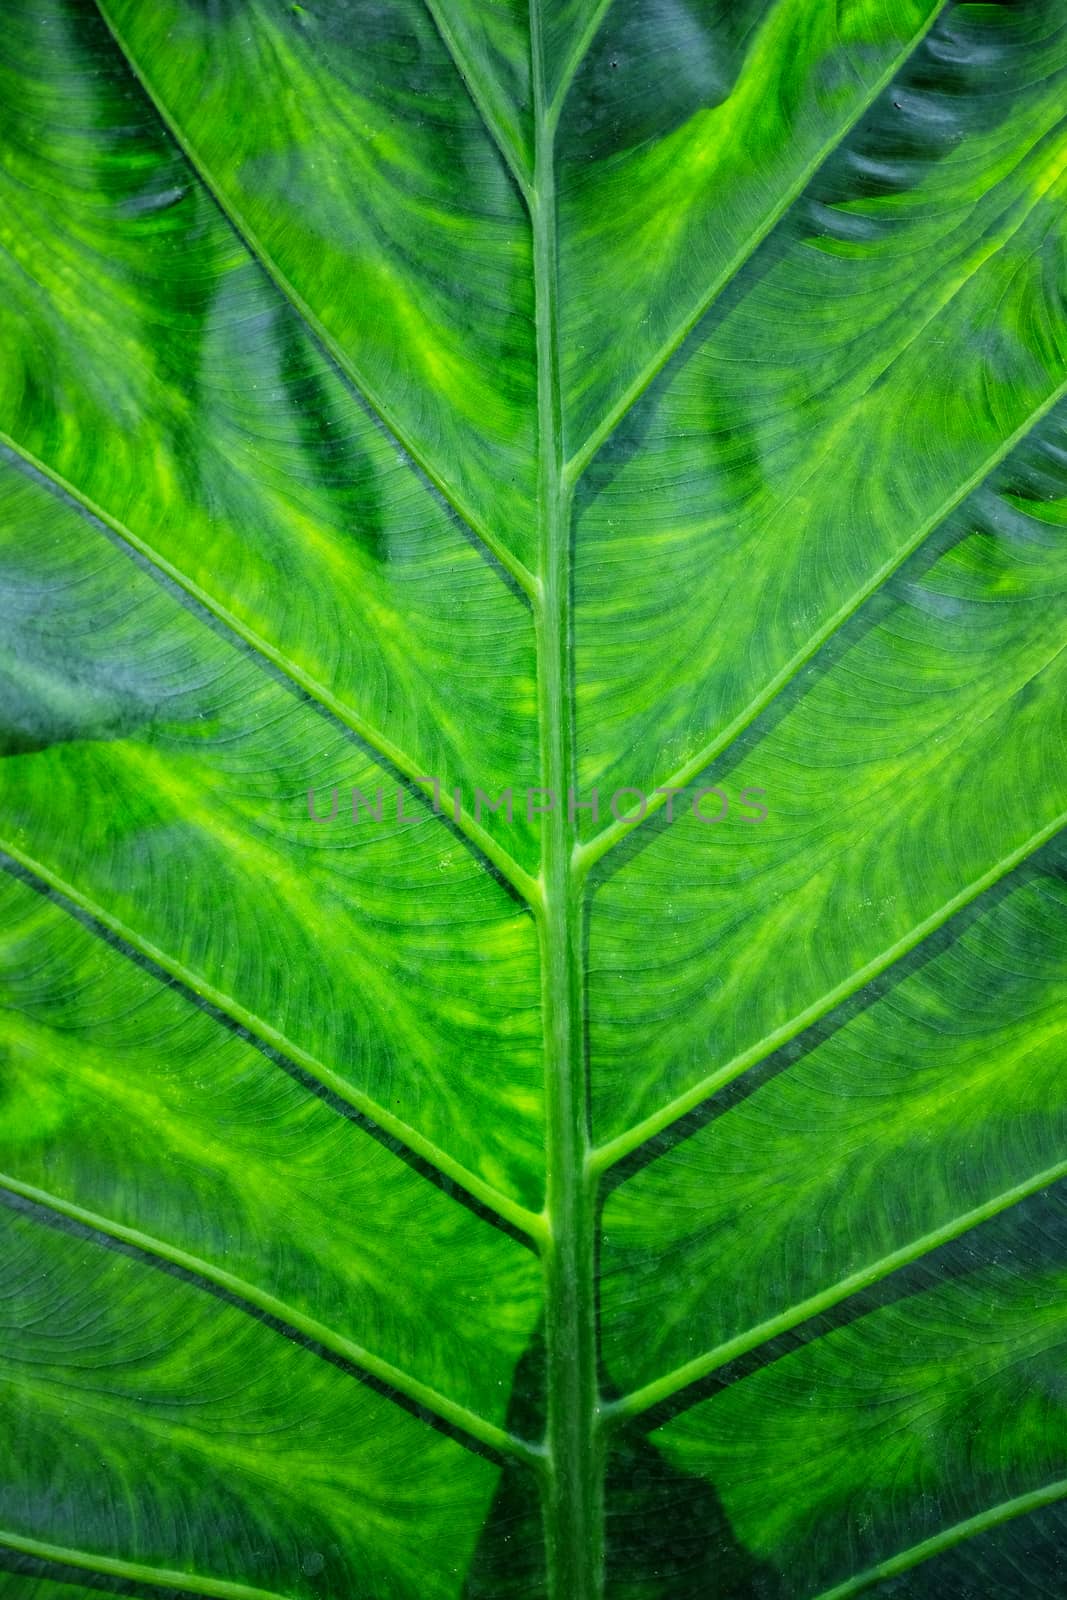 Texture and detail of a green leaf as background